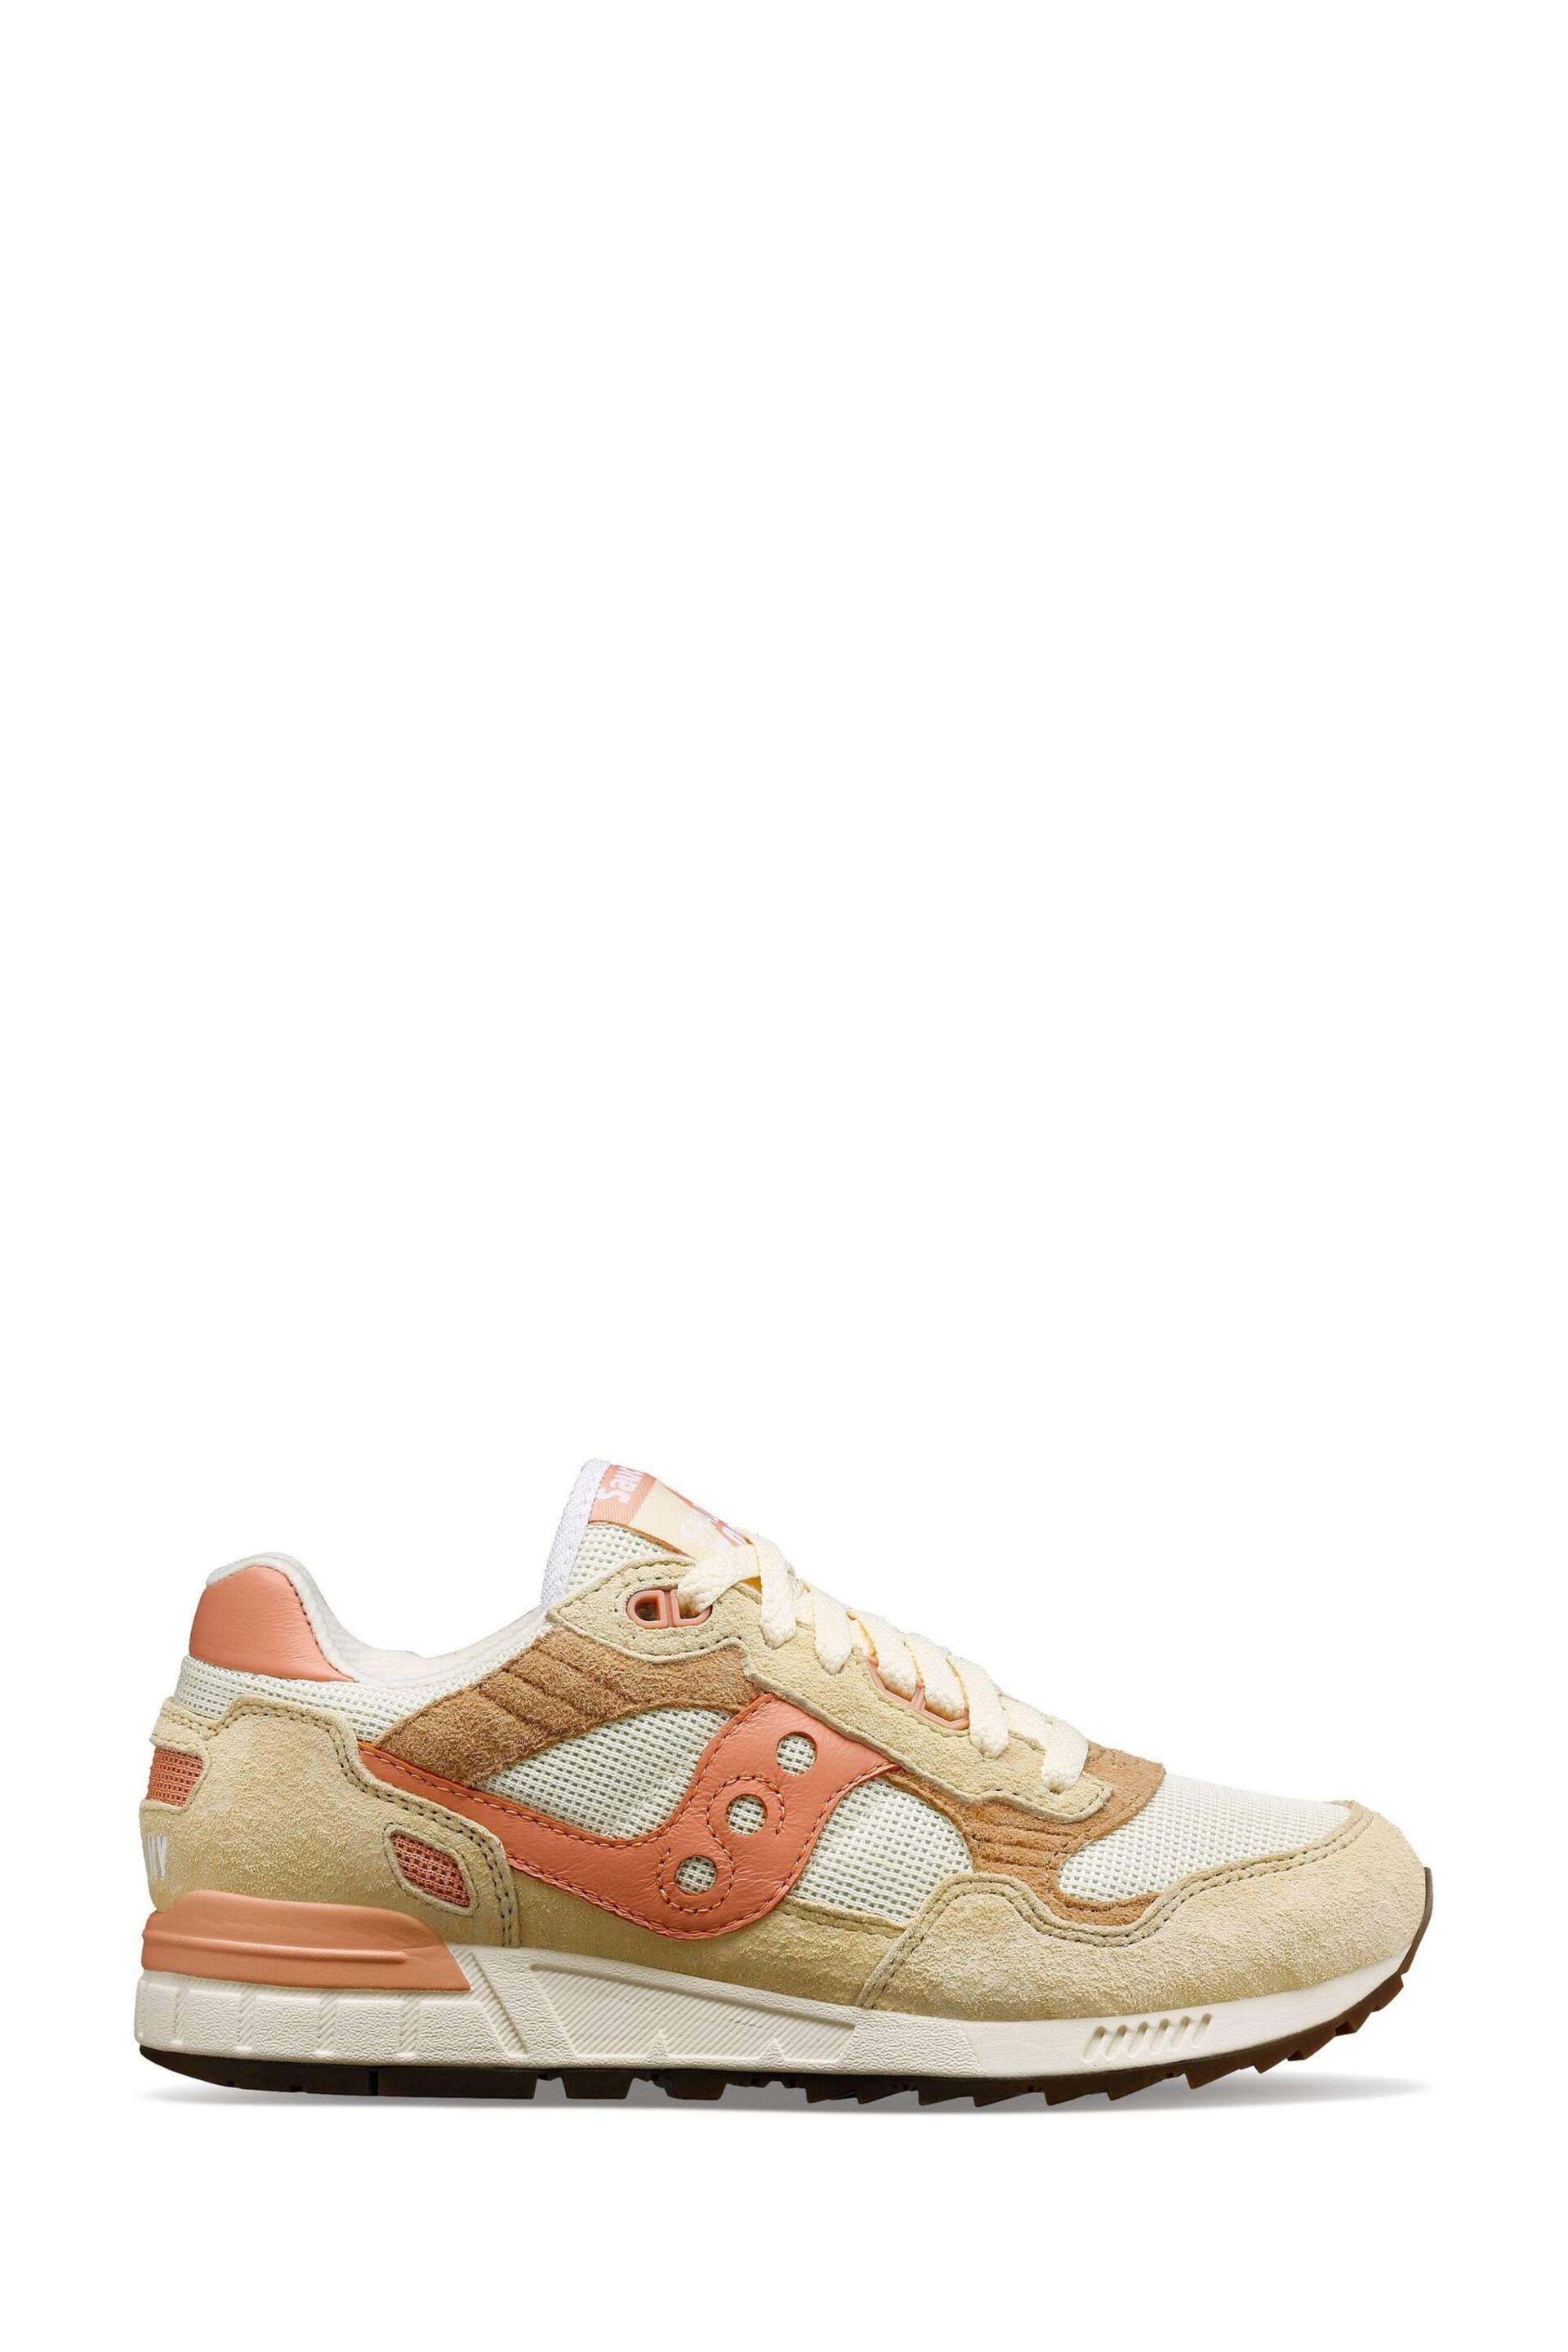 Saucony Pink Shadow 5000 Trainers - Image 1 of 1